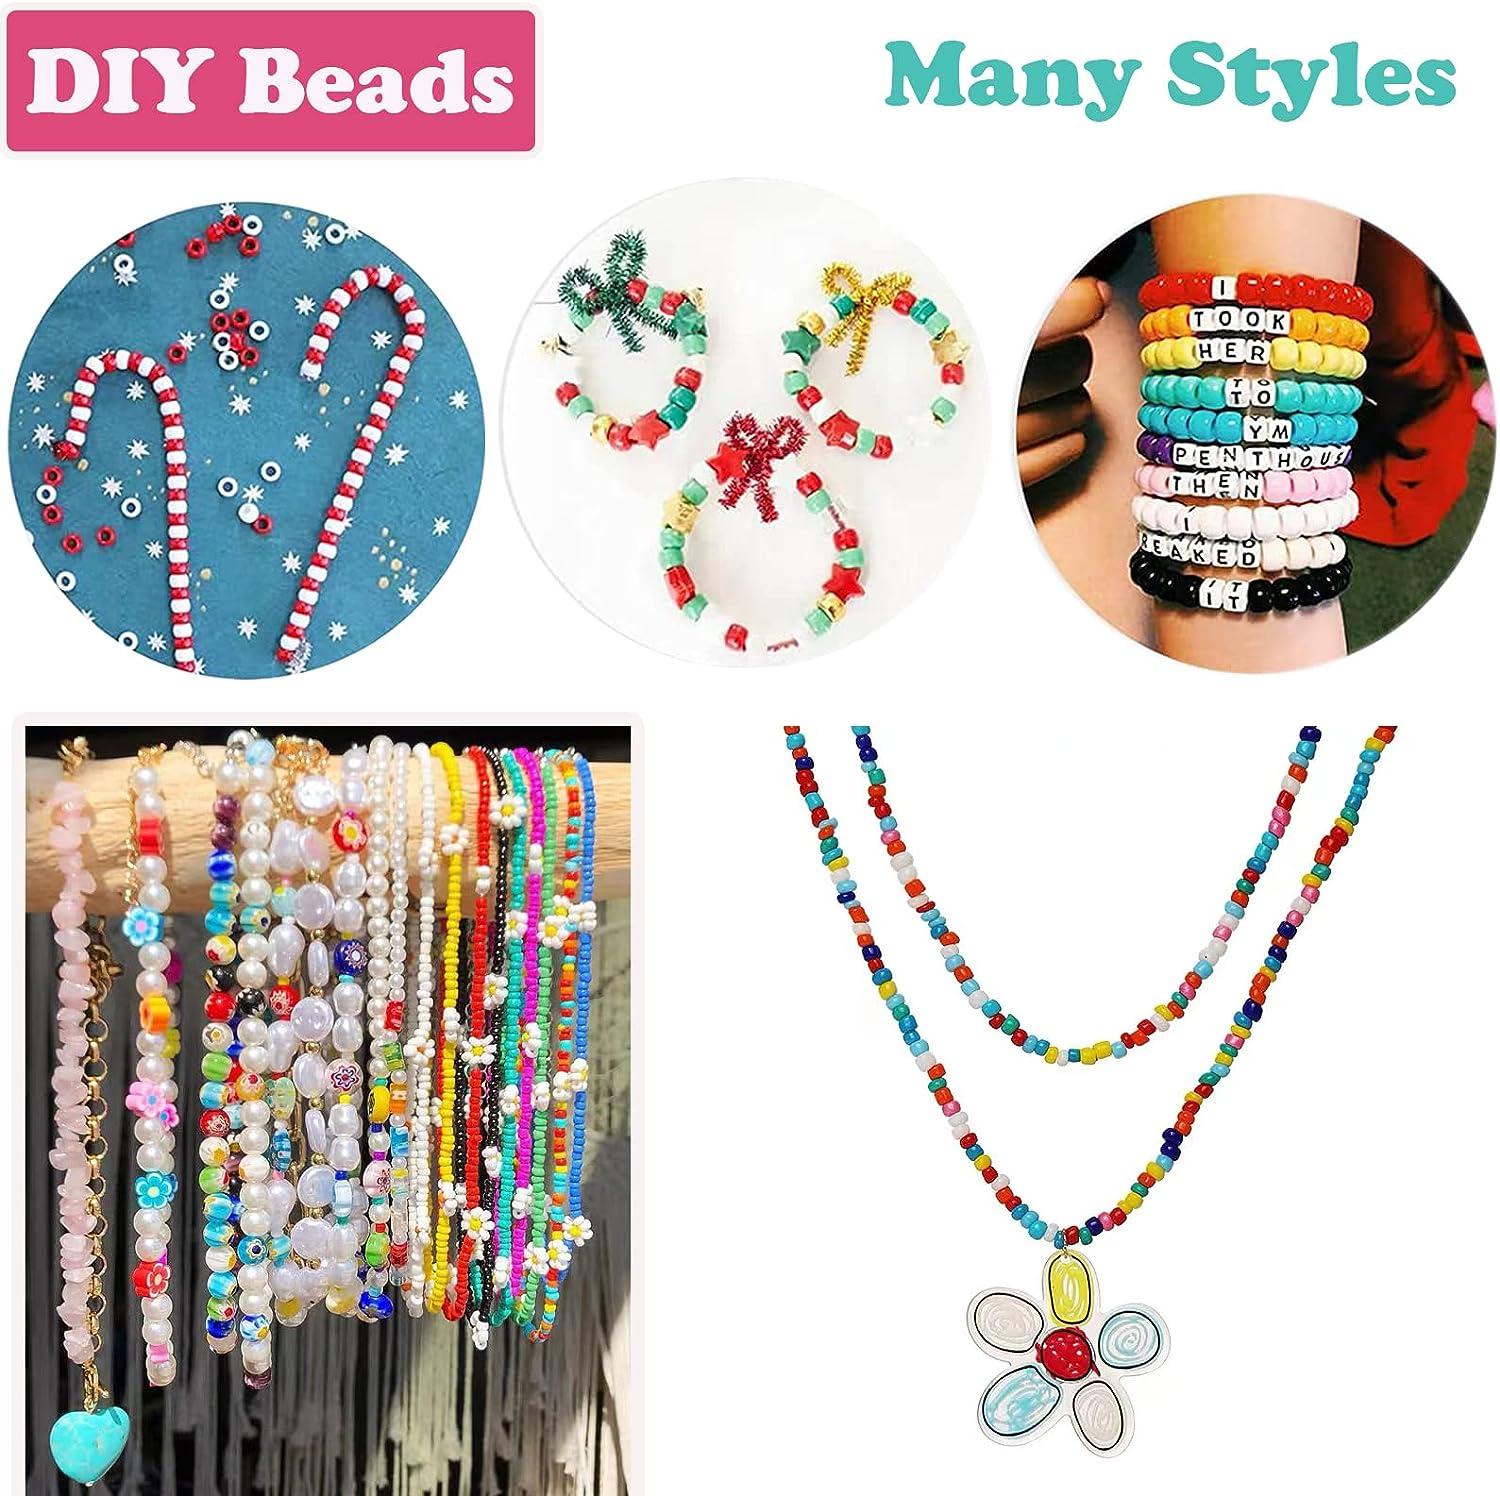 MontoSun Bead Bracelet Making Kit Pony Beads Polymer Clay Beads for  Bracelets Making Charms Beads Flower Smiley Letter Beads for Jewelry Making  DIY Art and Crafts Gifts for Girls age 4 5 6 7 8 9 10-12